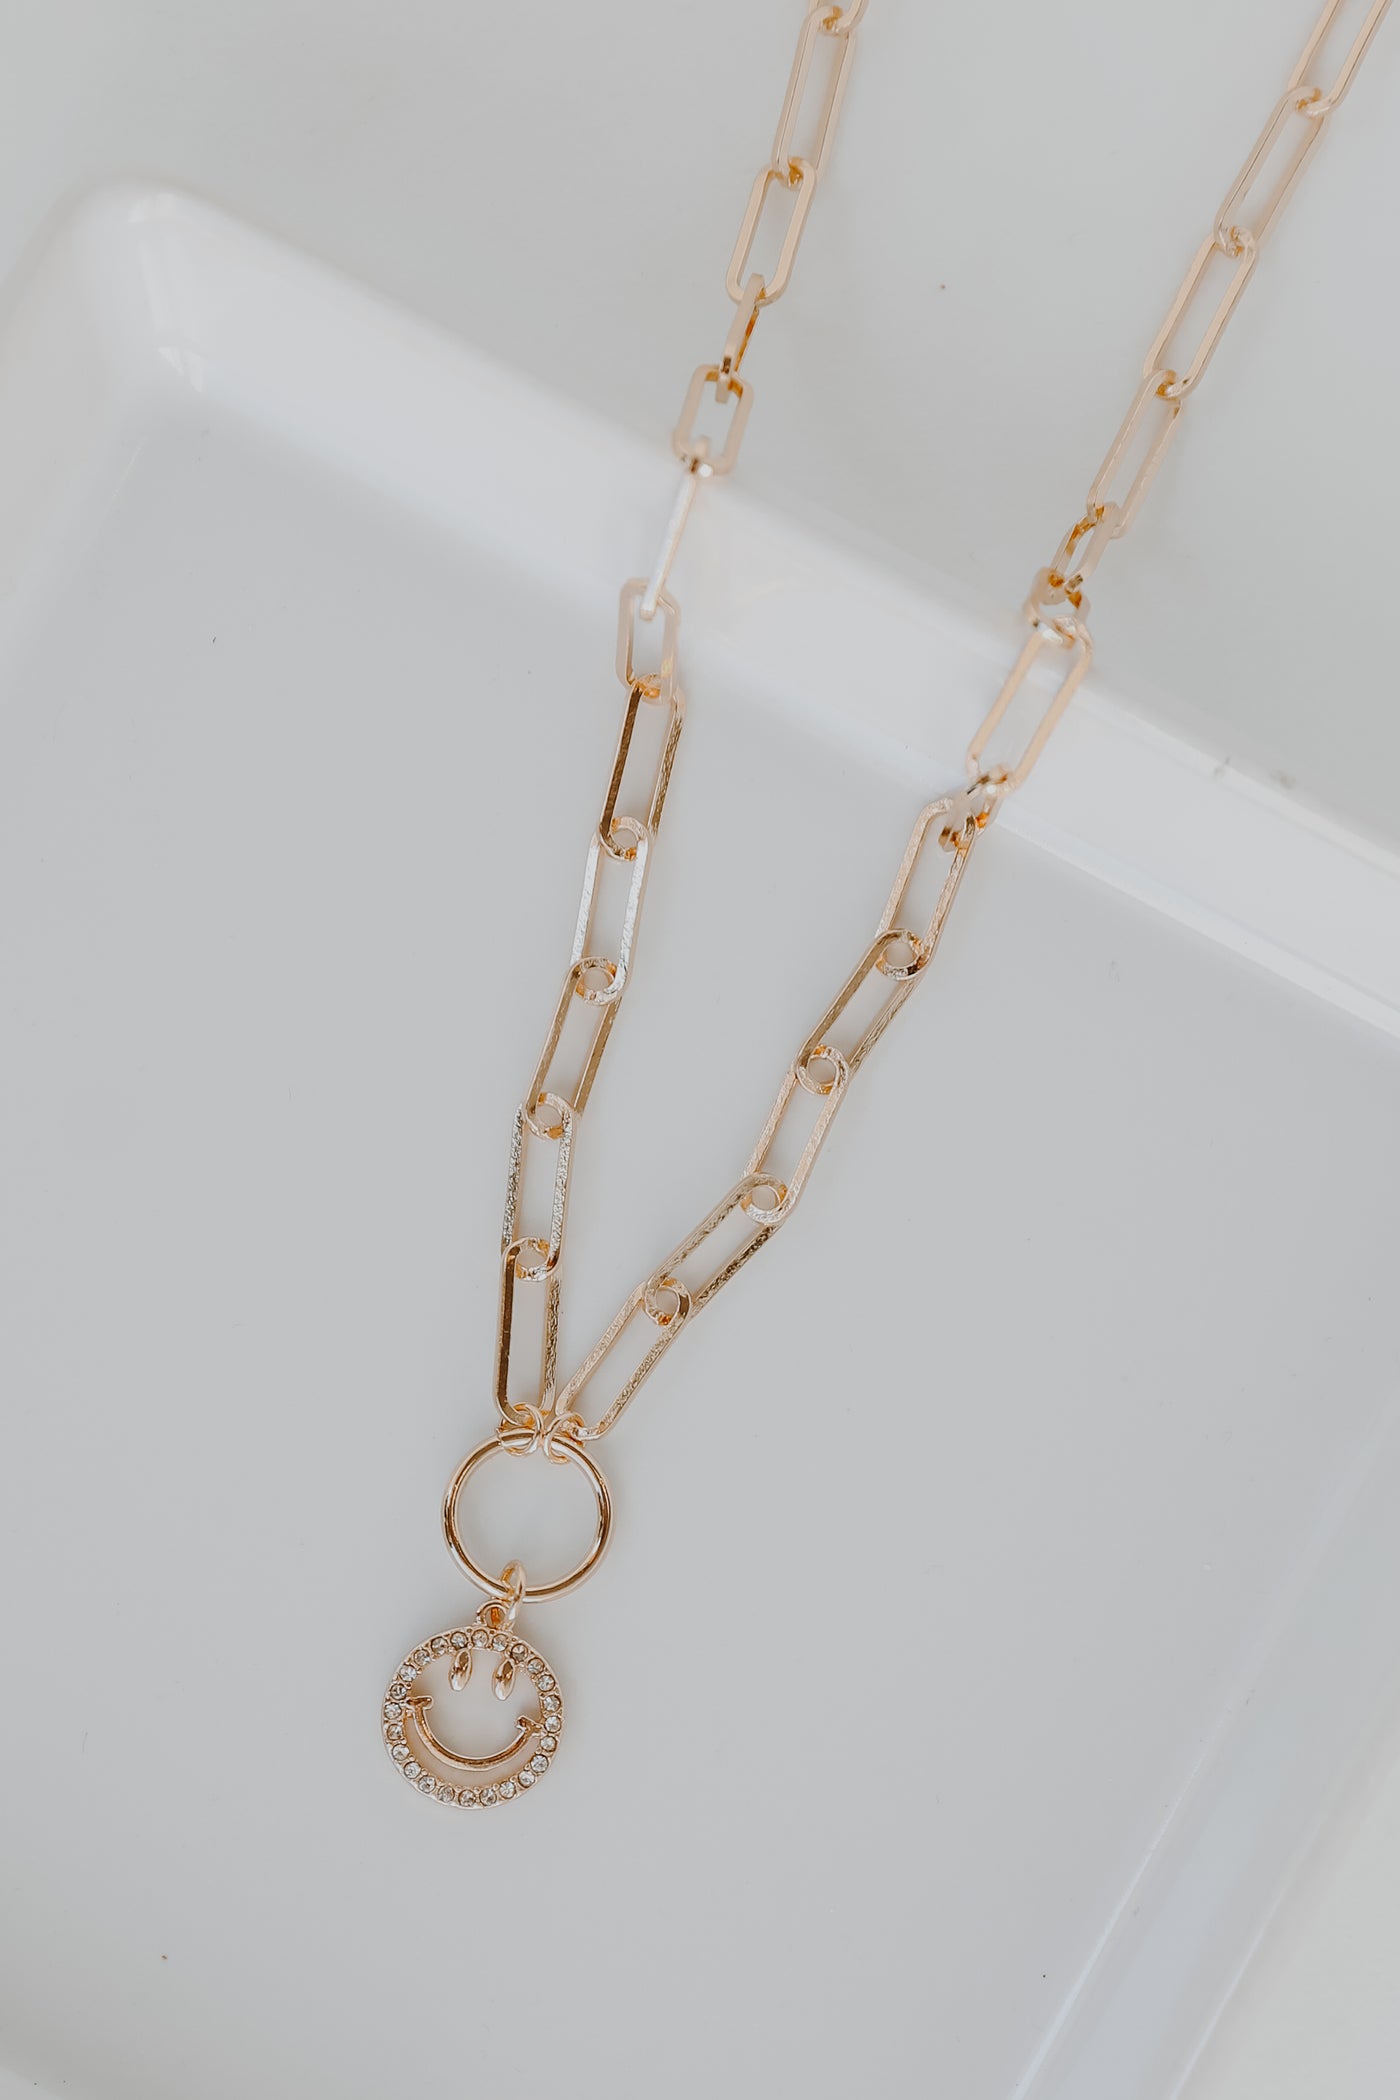 Gold Smiley Face Necklace from dress up